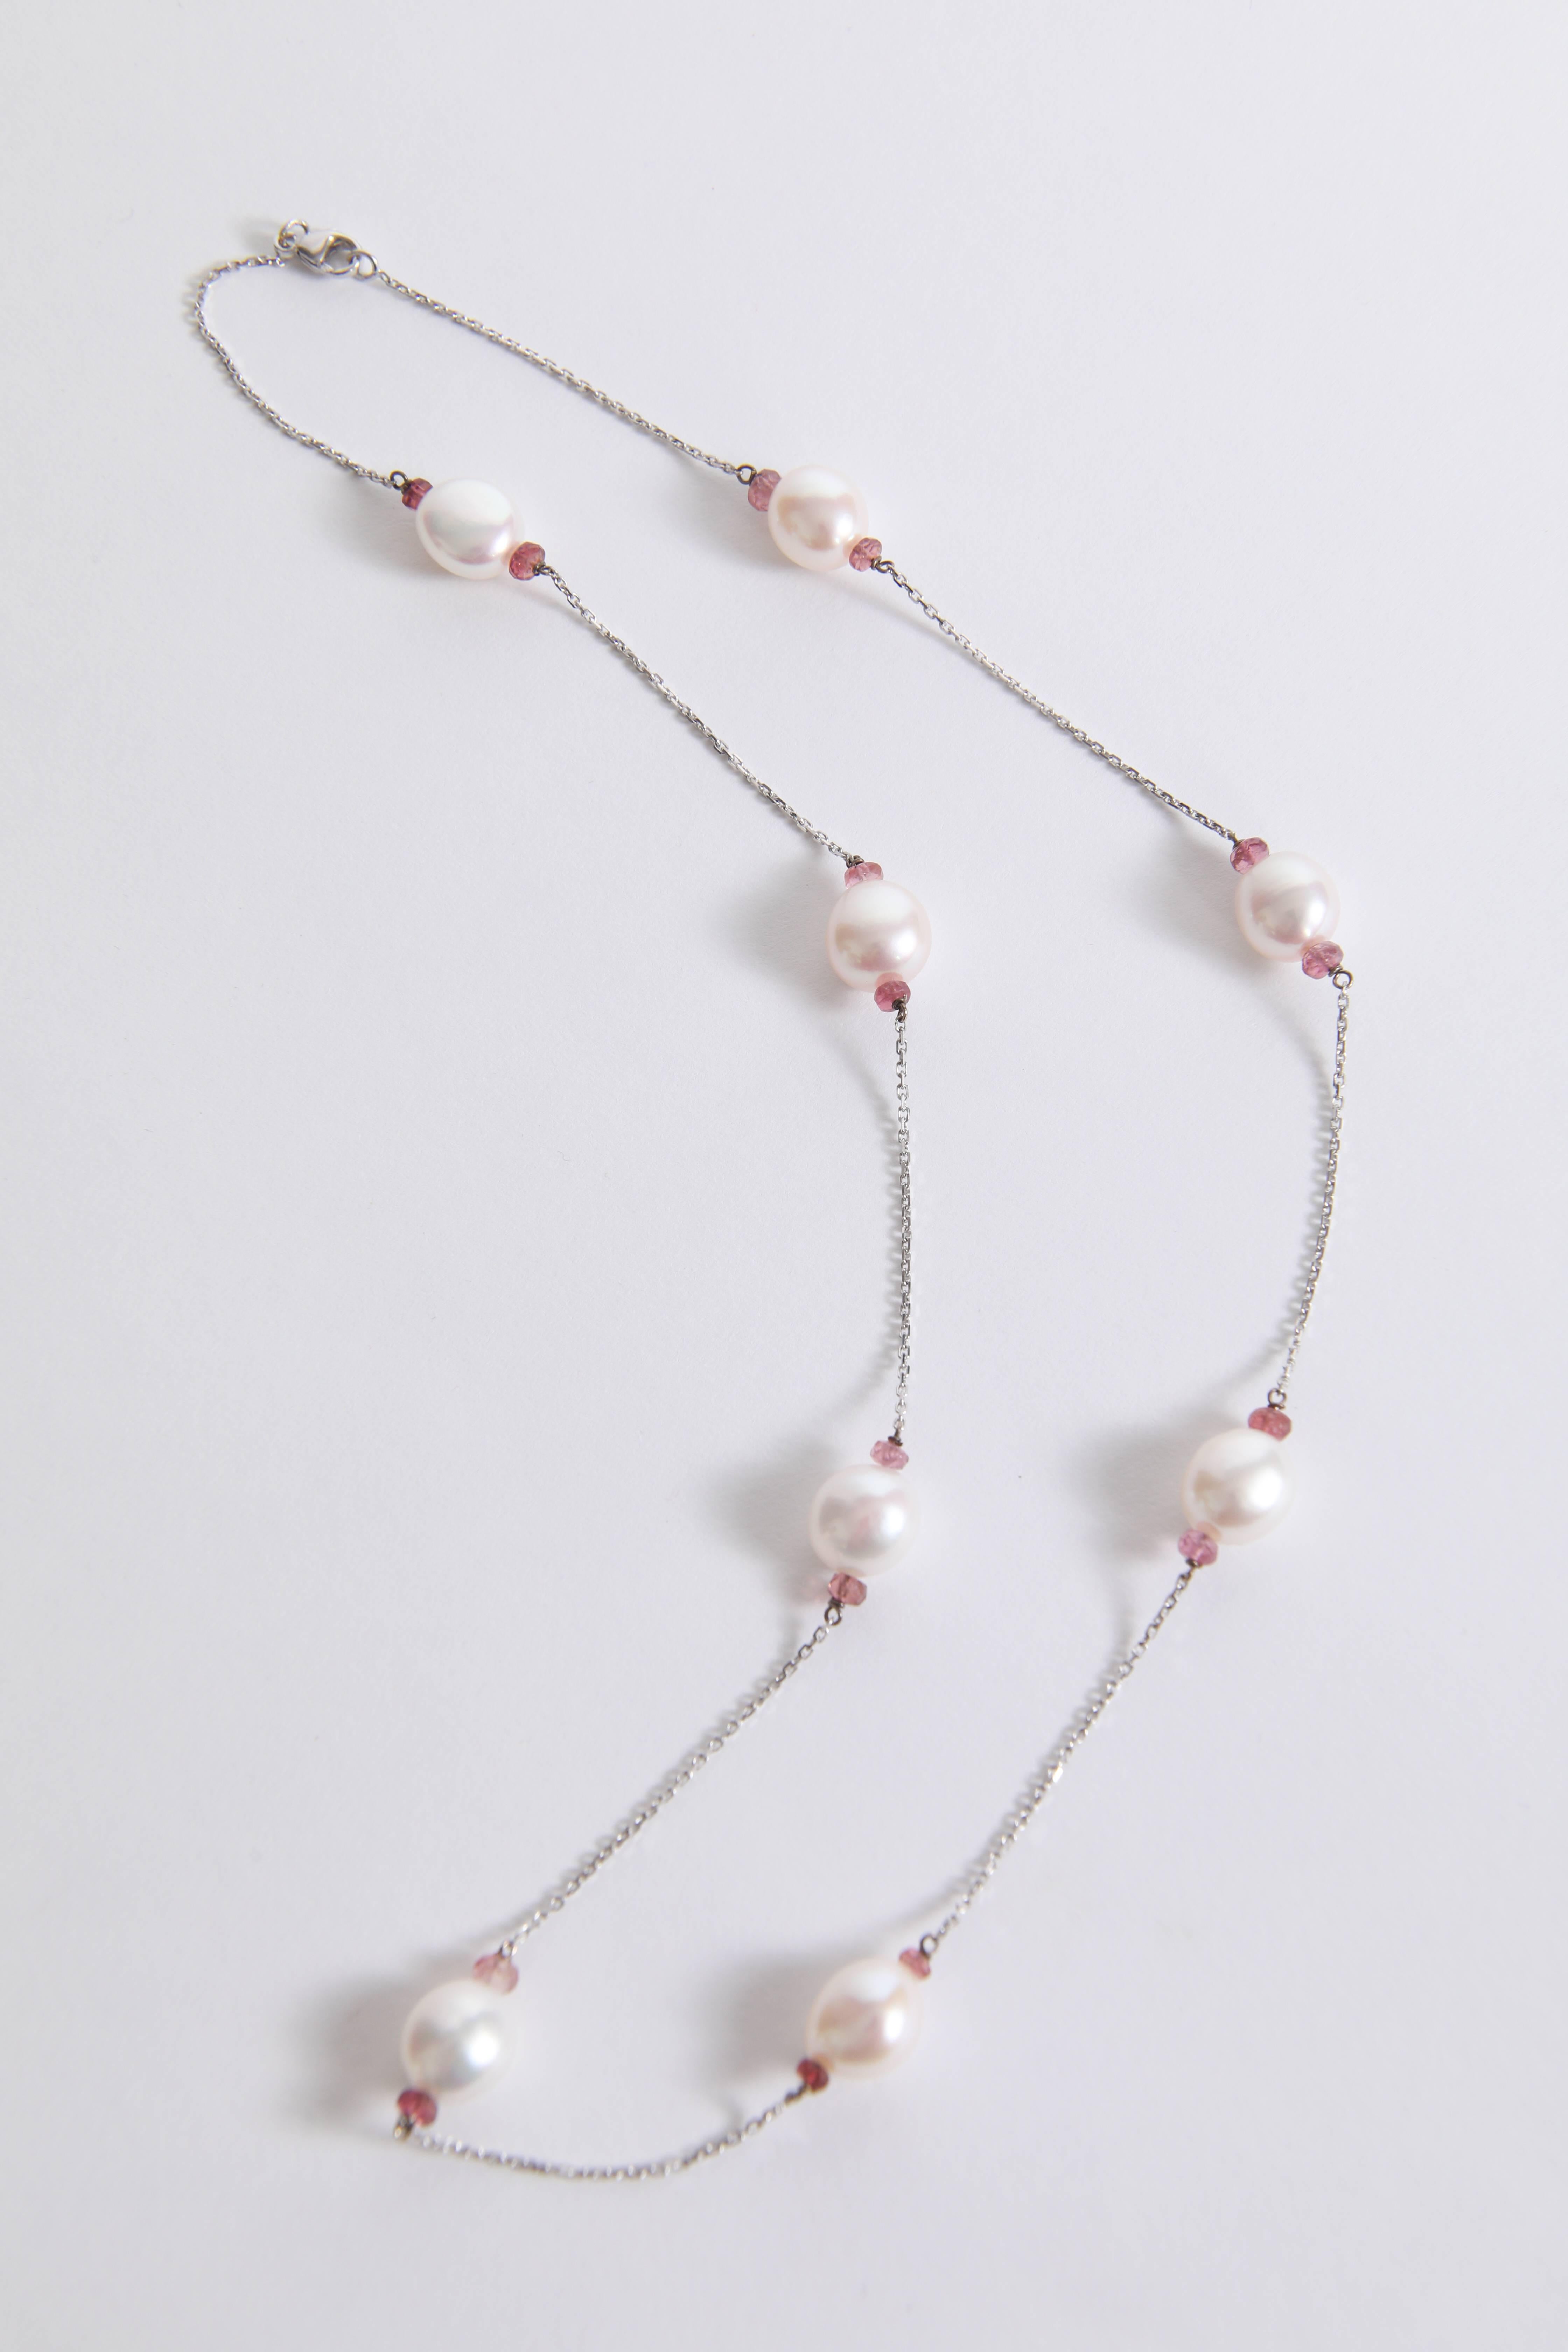 18k white gold necklace, 54cm long, eight freshwater pearls with pink tourmalines faceted 
washers created by Marion Jeantet.
Total weight: 13.58grams
French assay mark
Price without local taxes